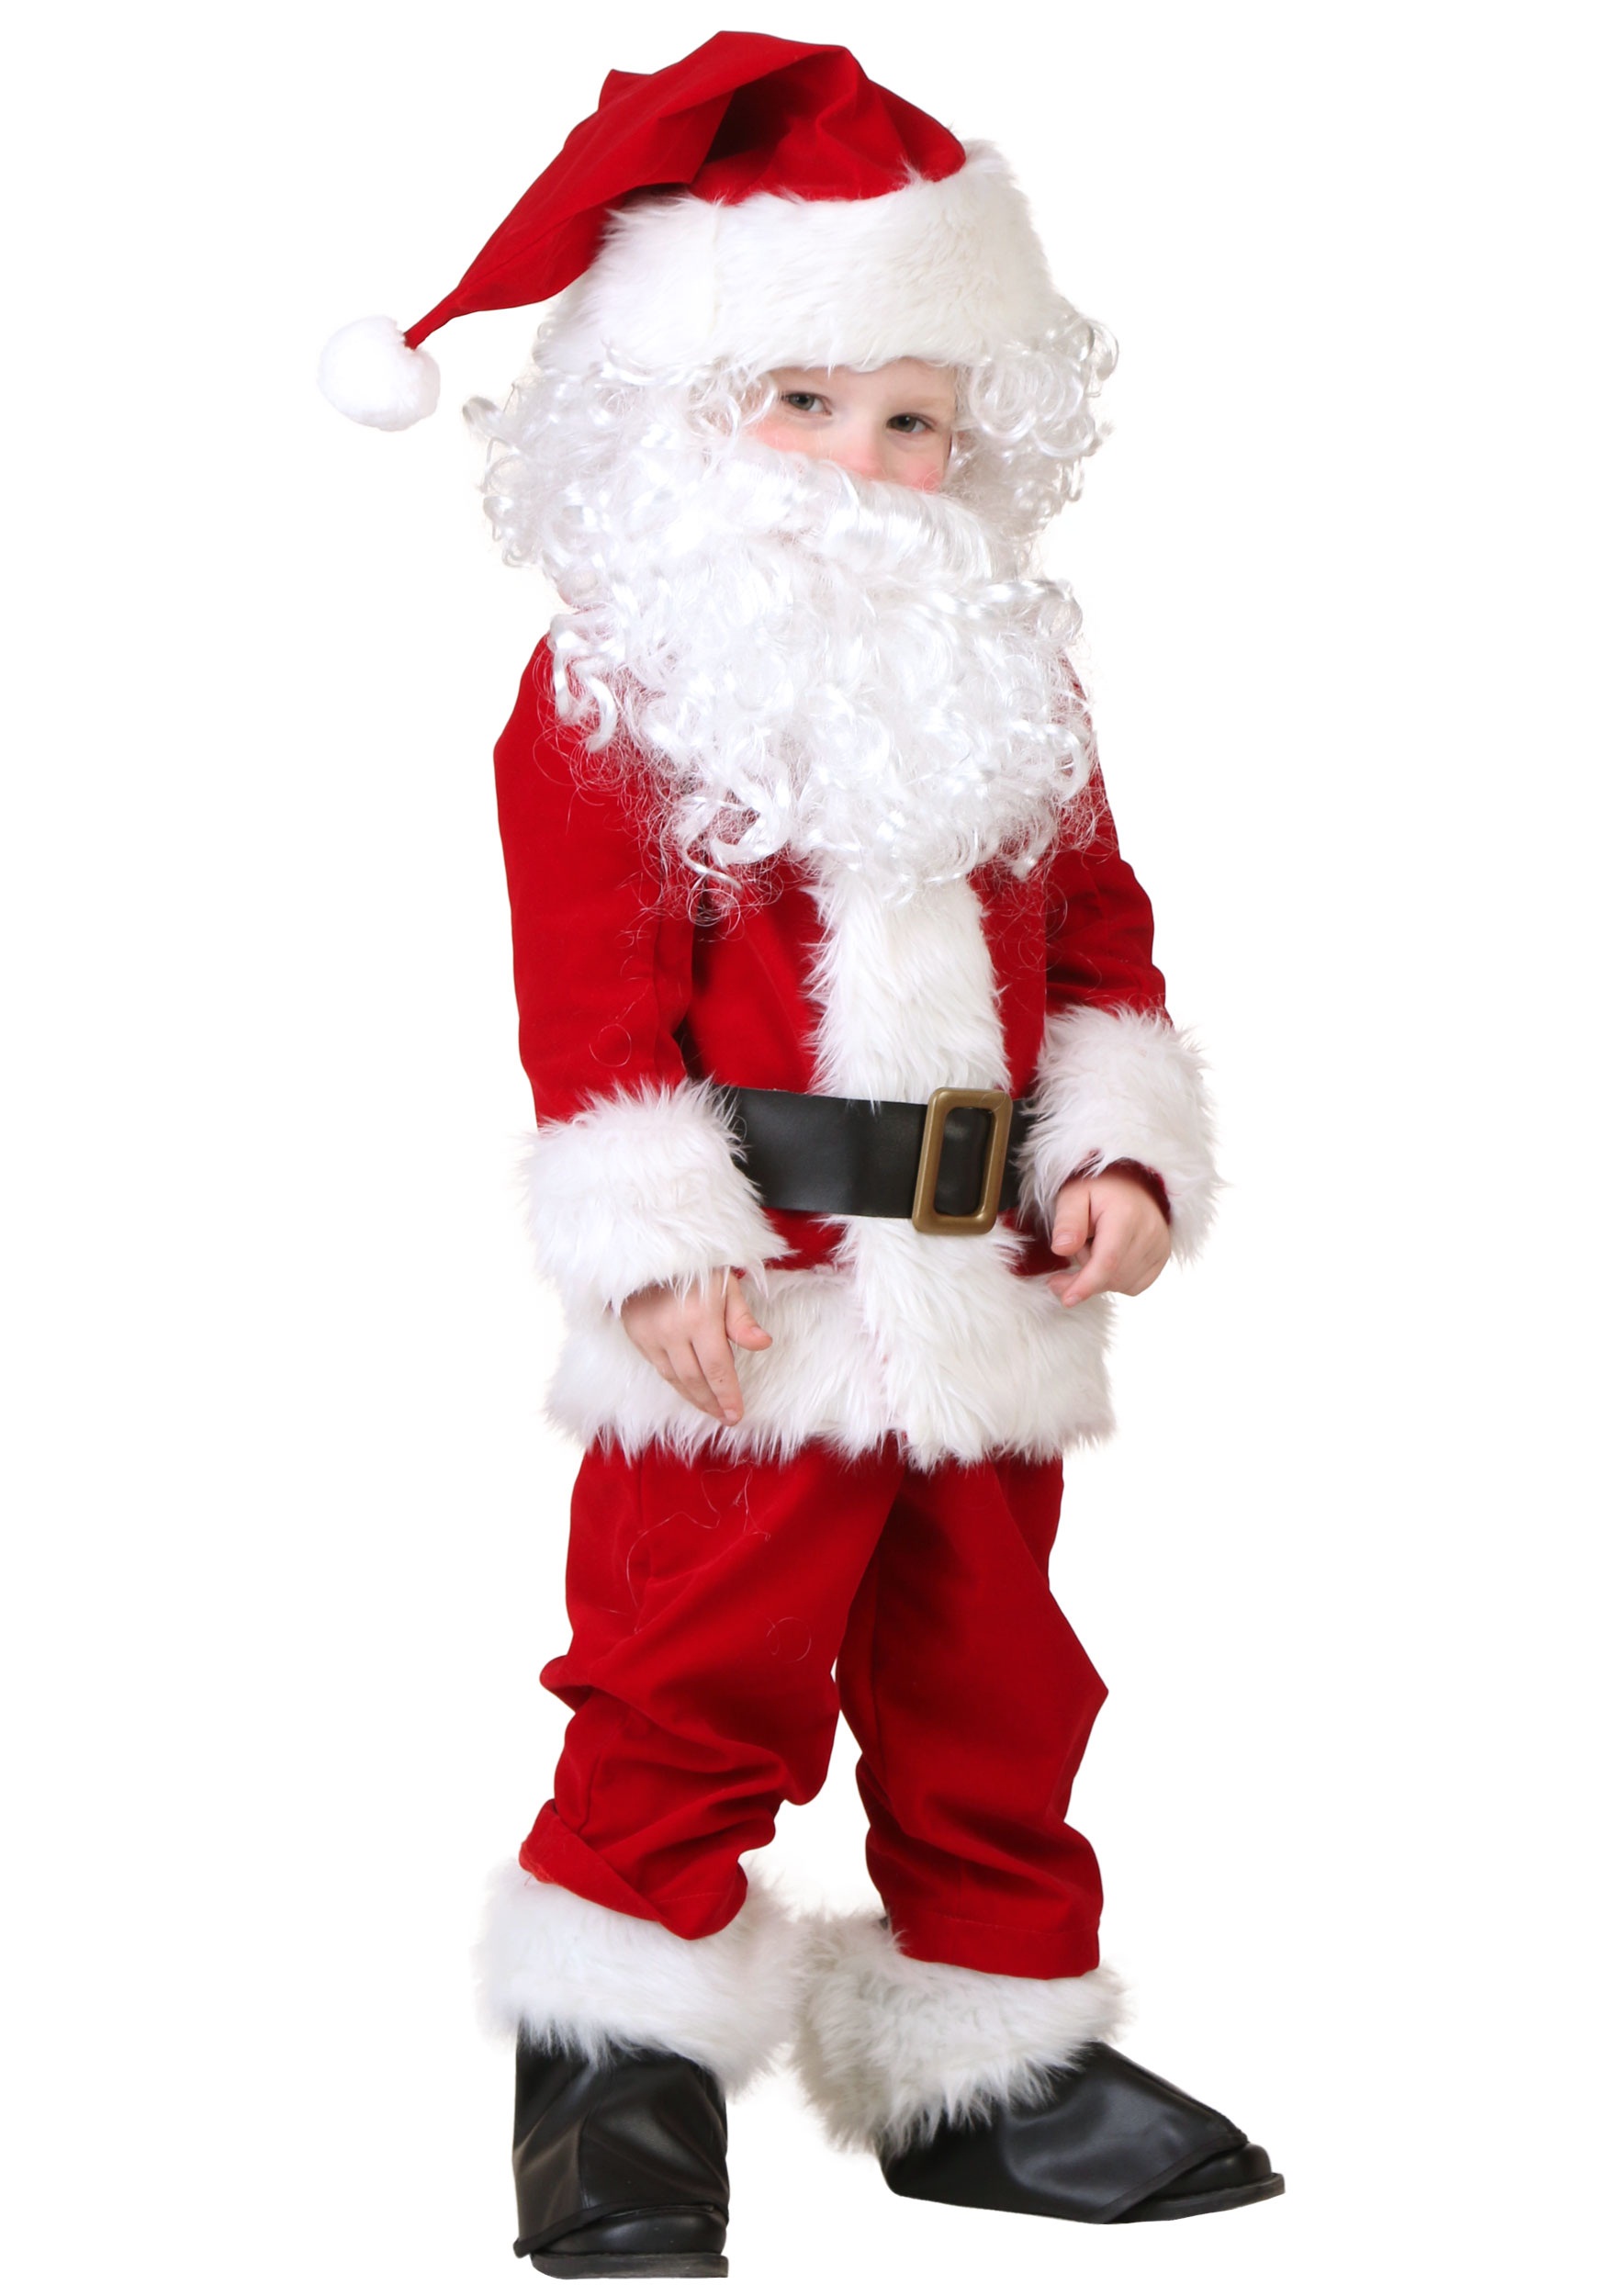 BOYS KIDS SANTA CLAUS CHRISTMAS COSTUME XMAS OUTFIT WITH HAT  3-10 Y 